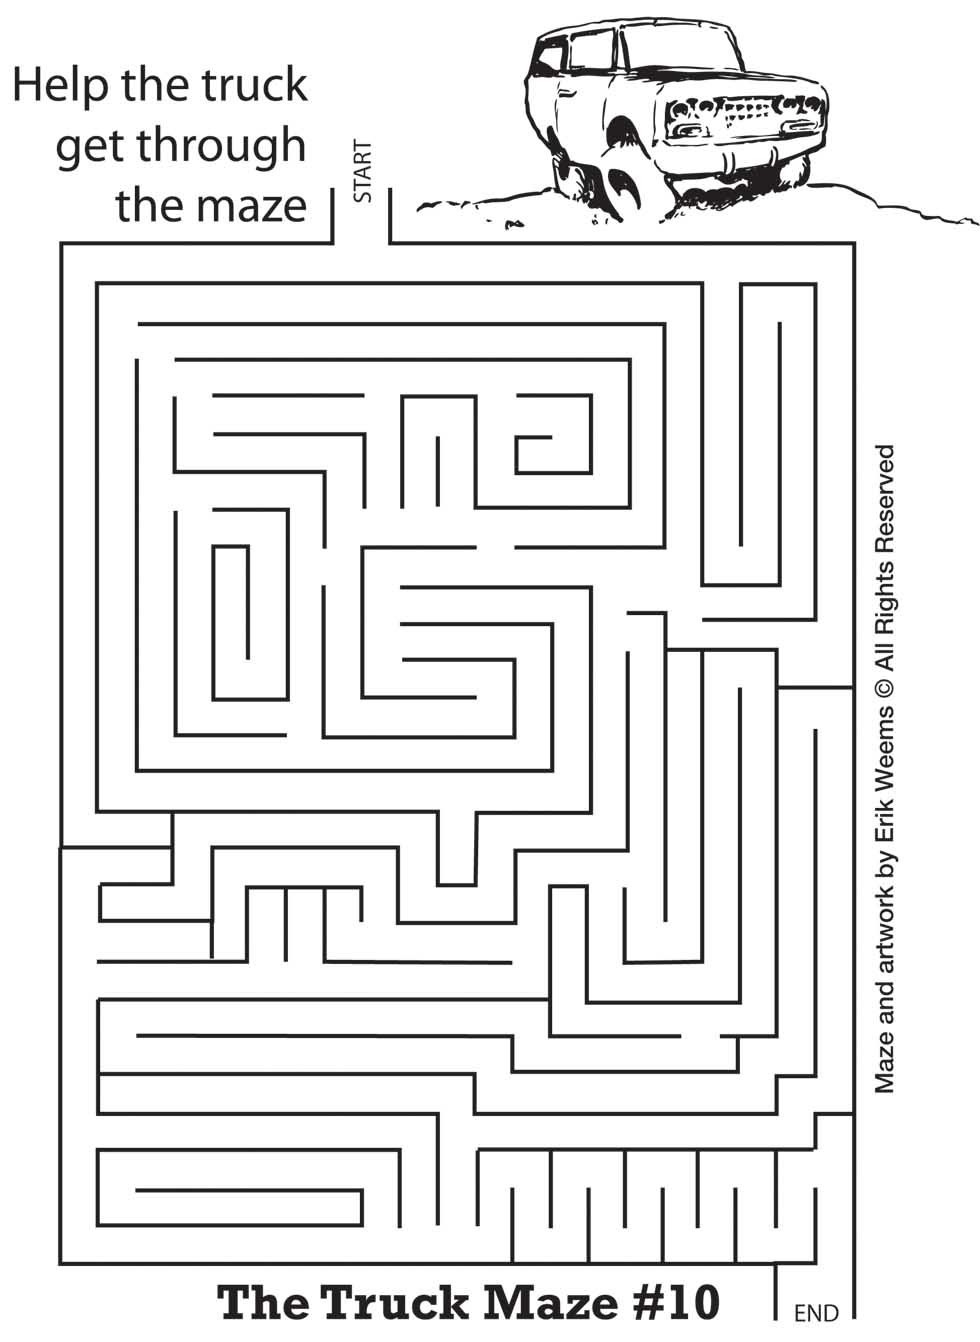 The Truck Maze - help the truck move through the maze